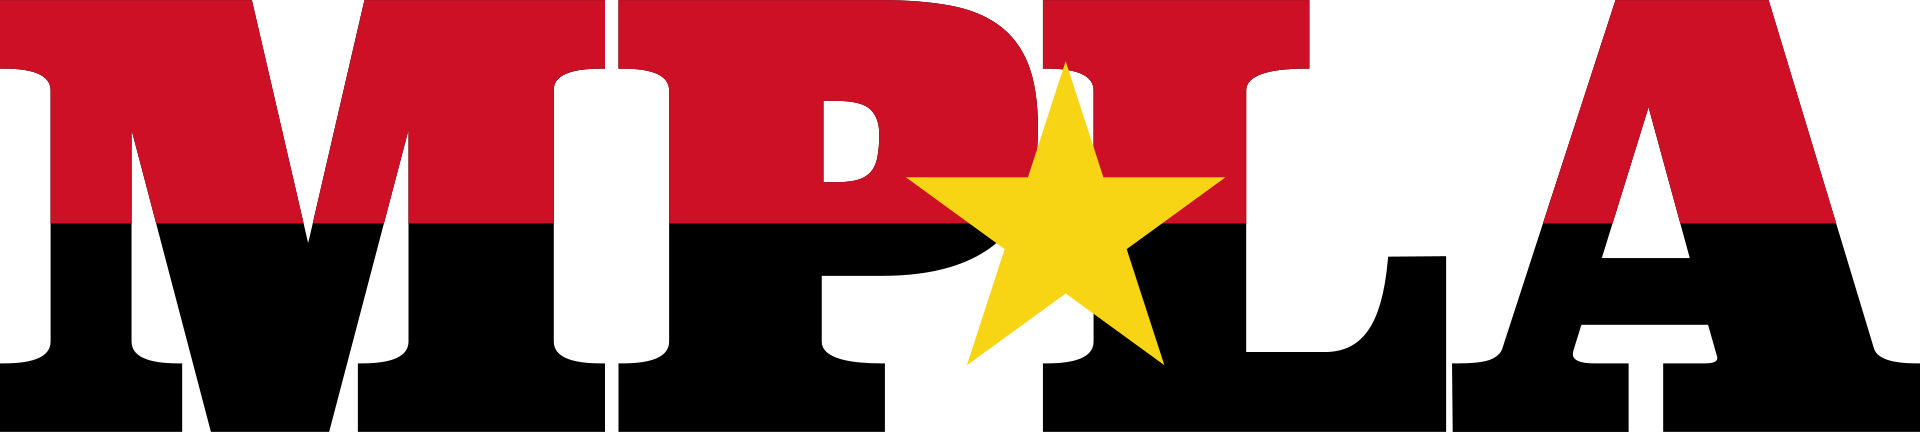 File:Logo of the MPLA (Angola).svg.png